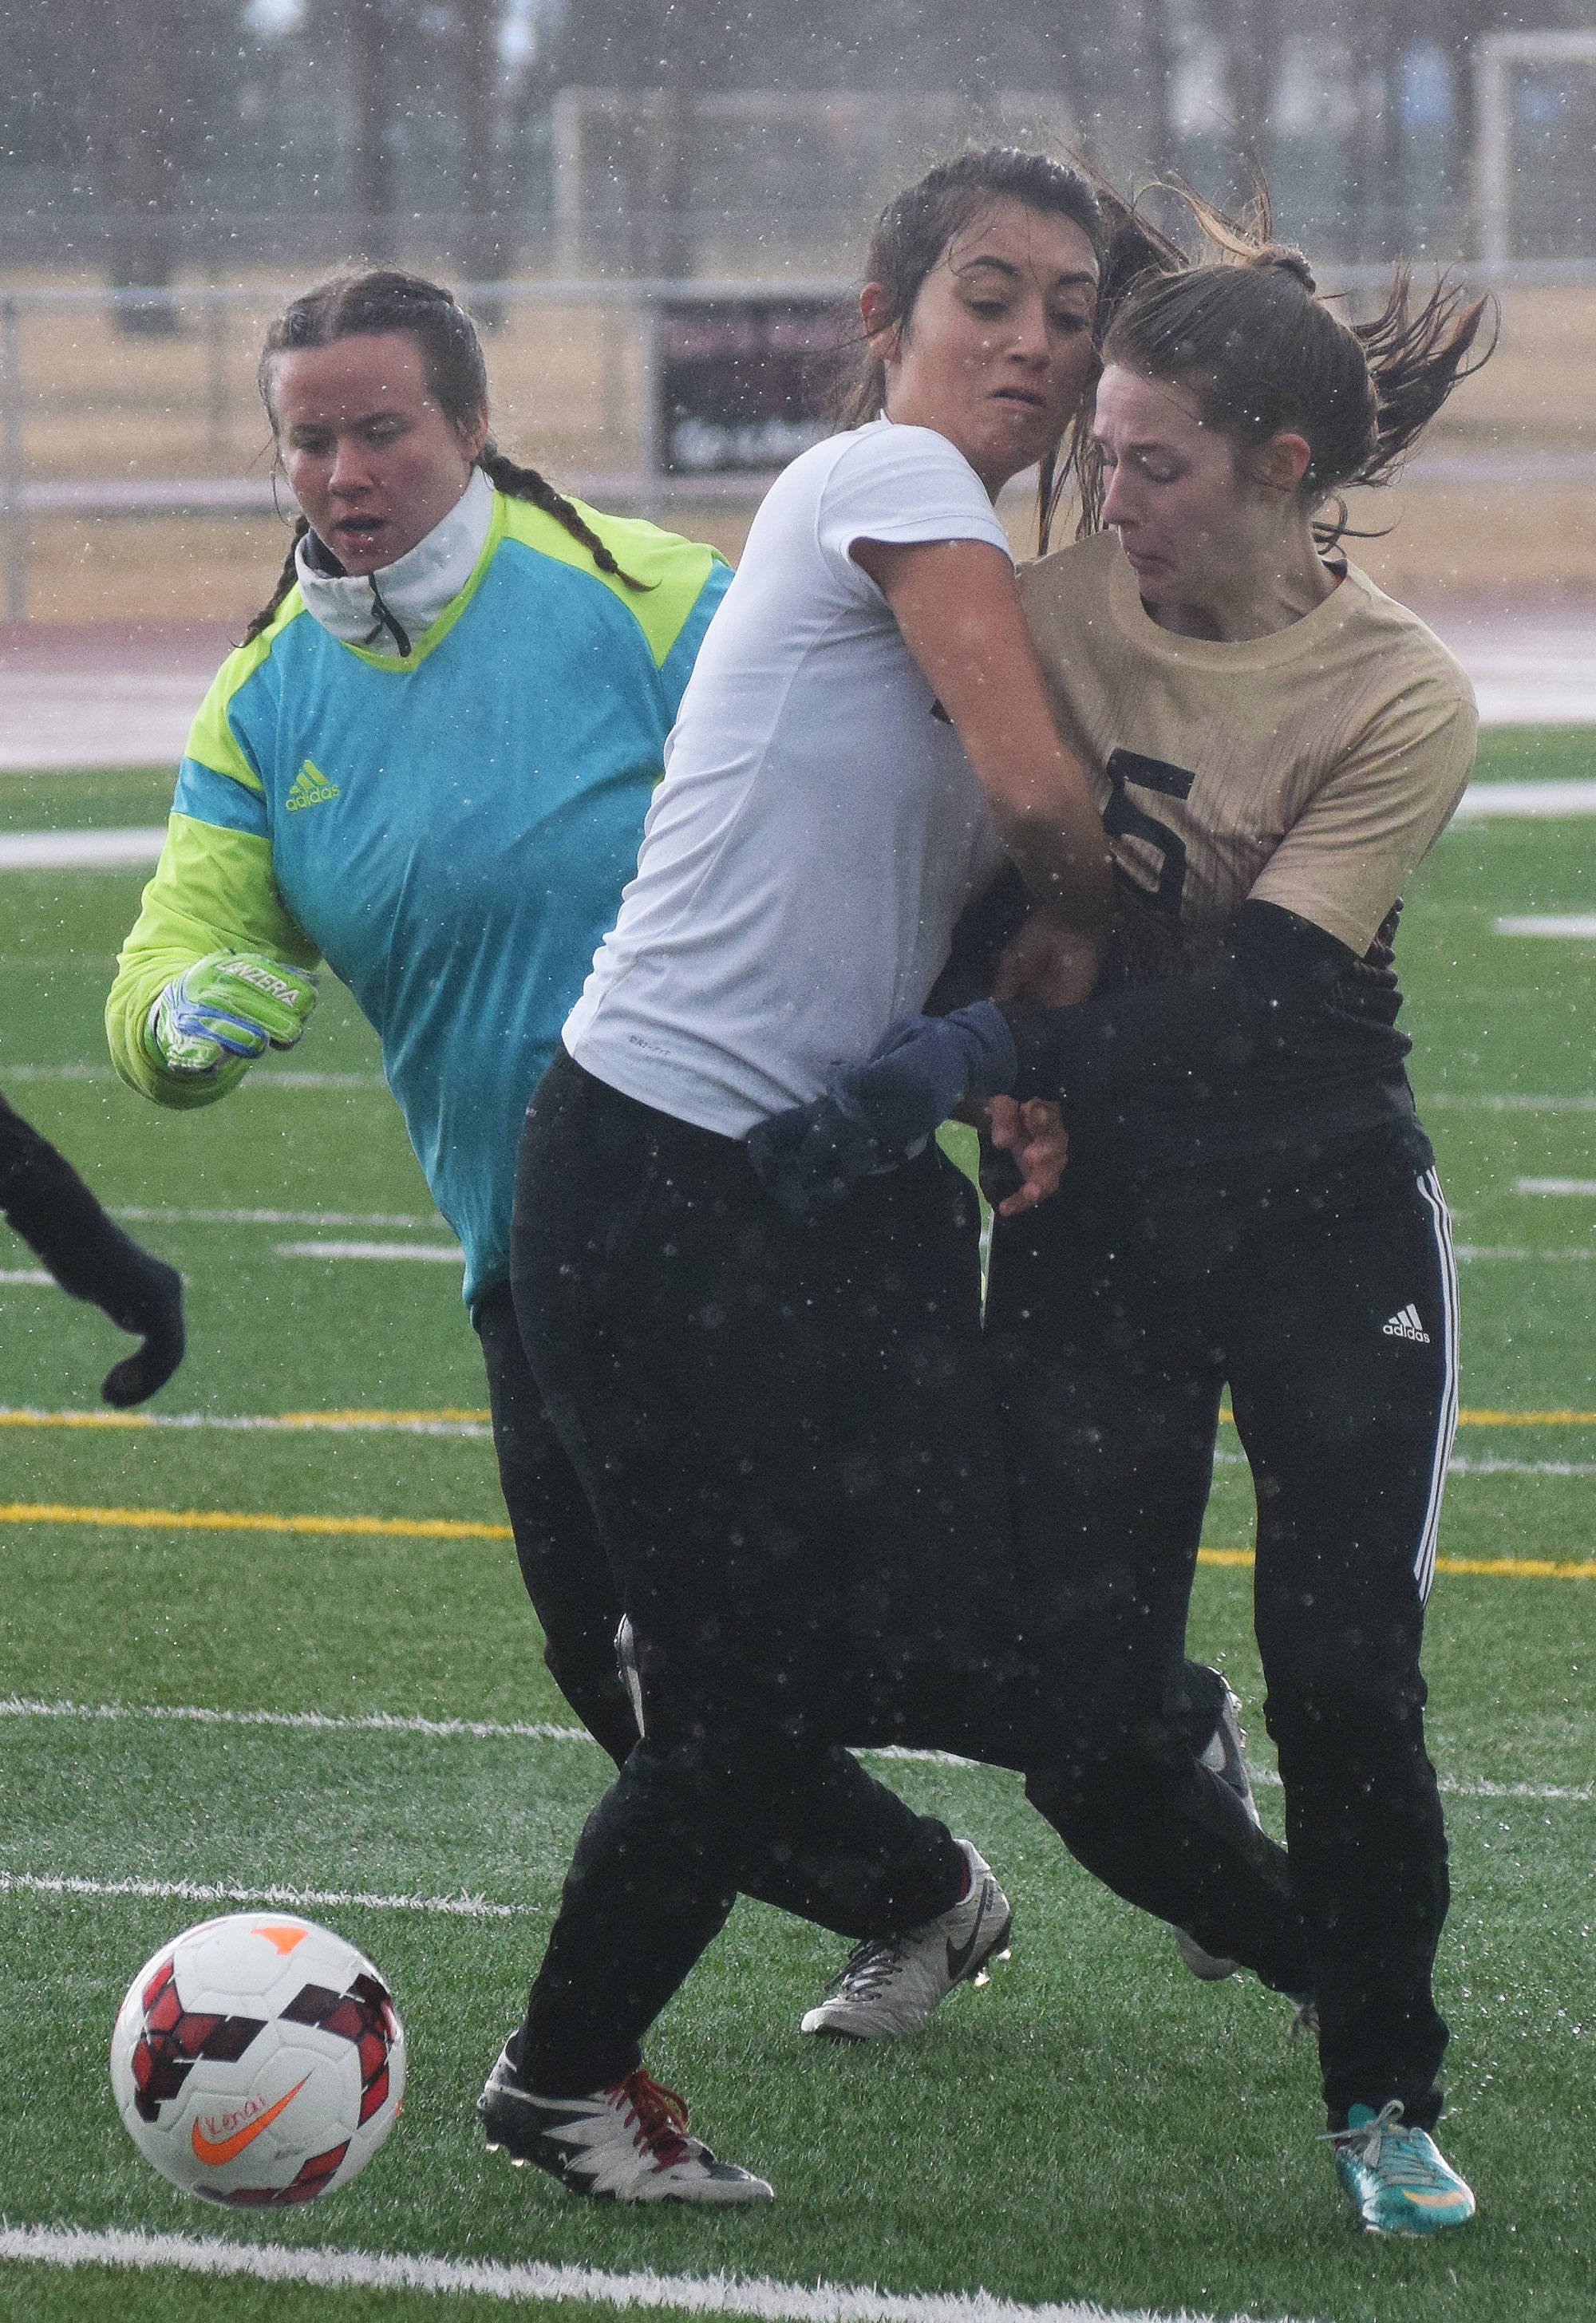 Kenai’s Brenna Eubank (middle) battles with the Grace Christian goalkeeper and defender Amy Hatter (5) Saturday at Kenai Central High School. (Photo by Joey Klecka/Peninsula Clarion)